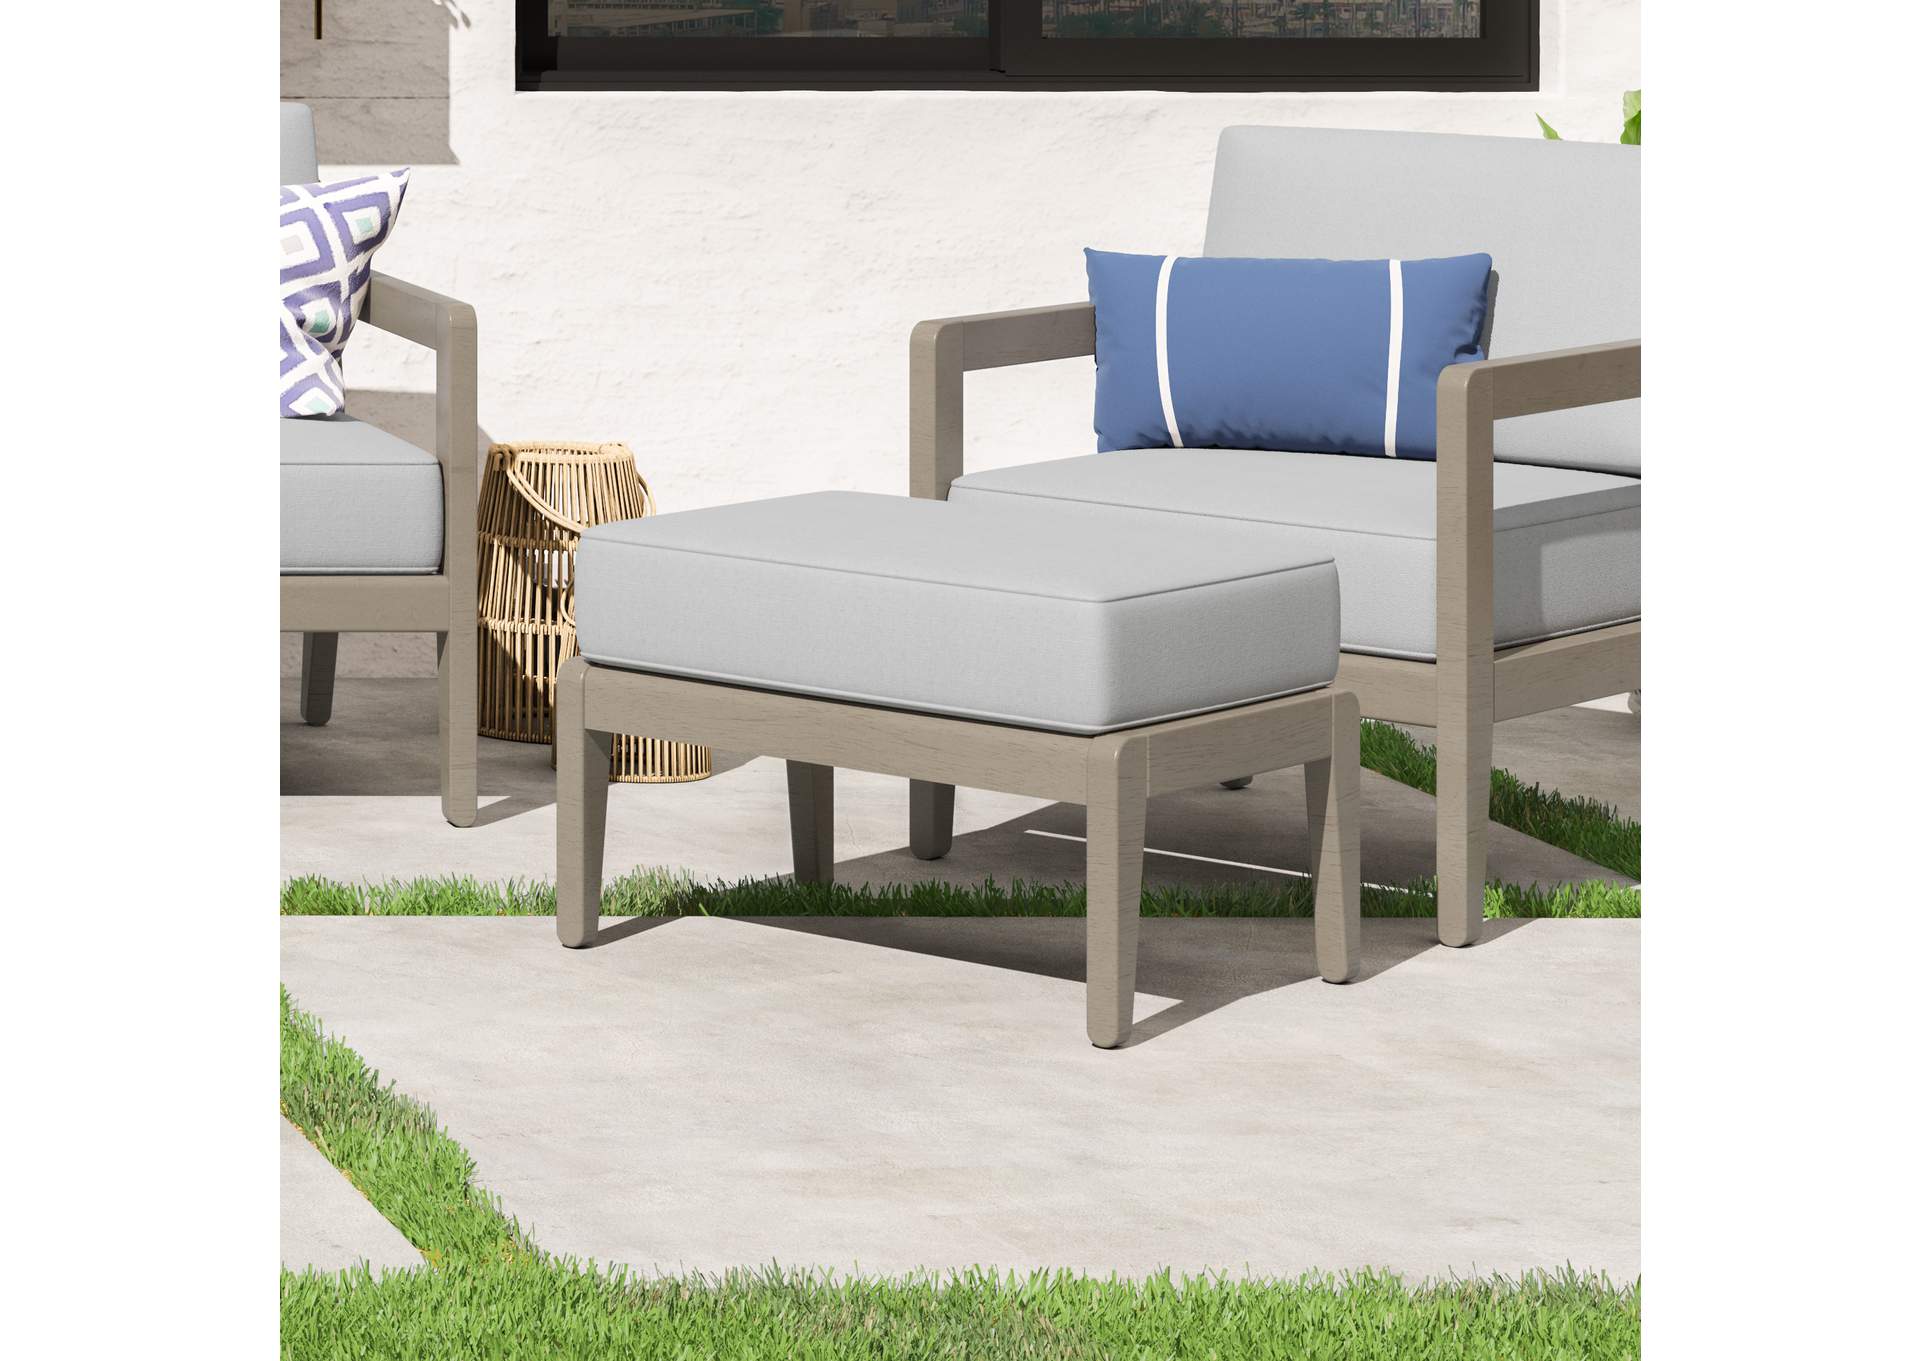 Sustain Outdoor Ottoman By Homestyles,Homestyles